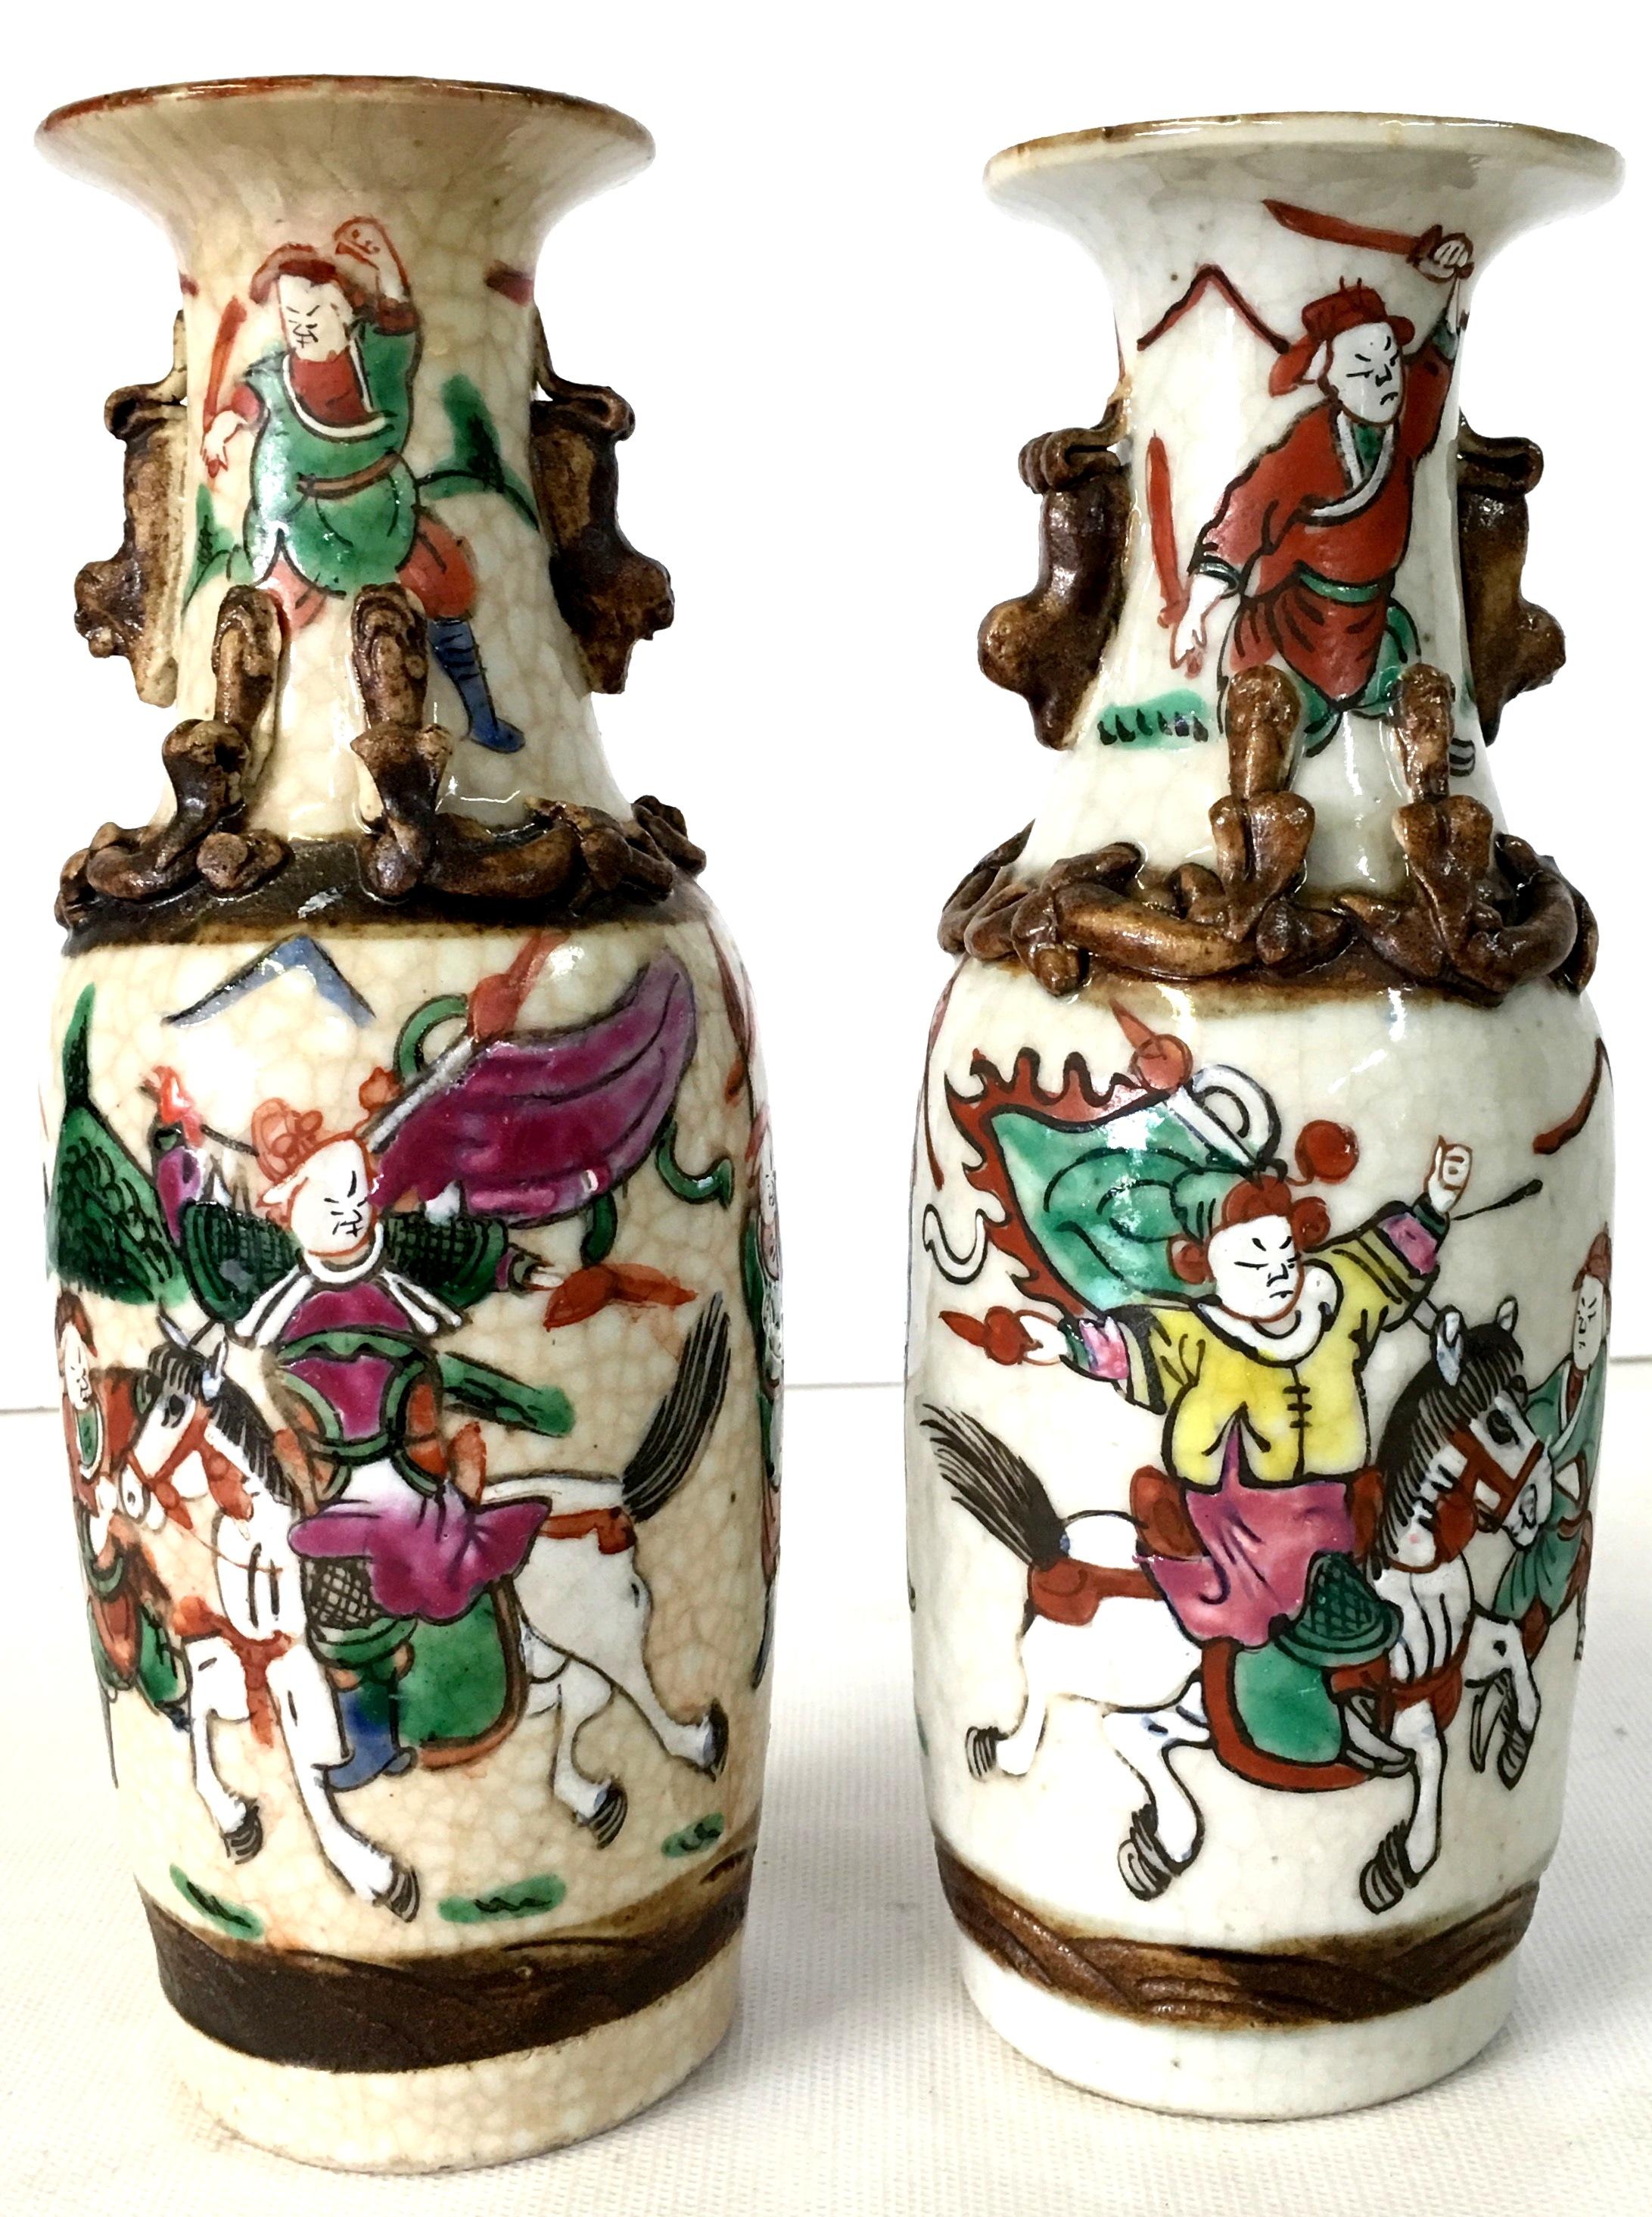 19th century antique Japanese pair of crackle ware poly chrome warrior motif vases with high relief foo lions. Each piece is signed on the underside and have slight variances.
Hand painted in purple, green, orange, white, black and blue with brown